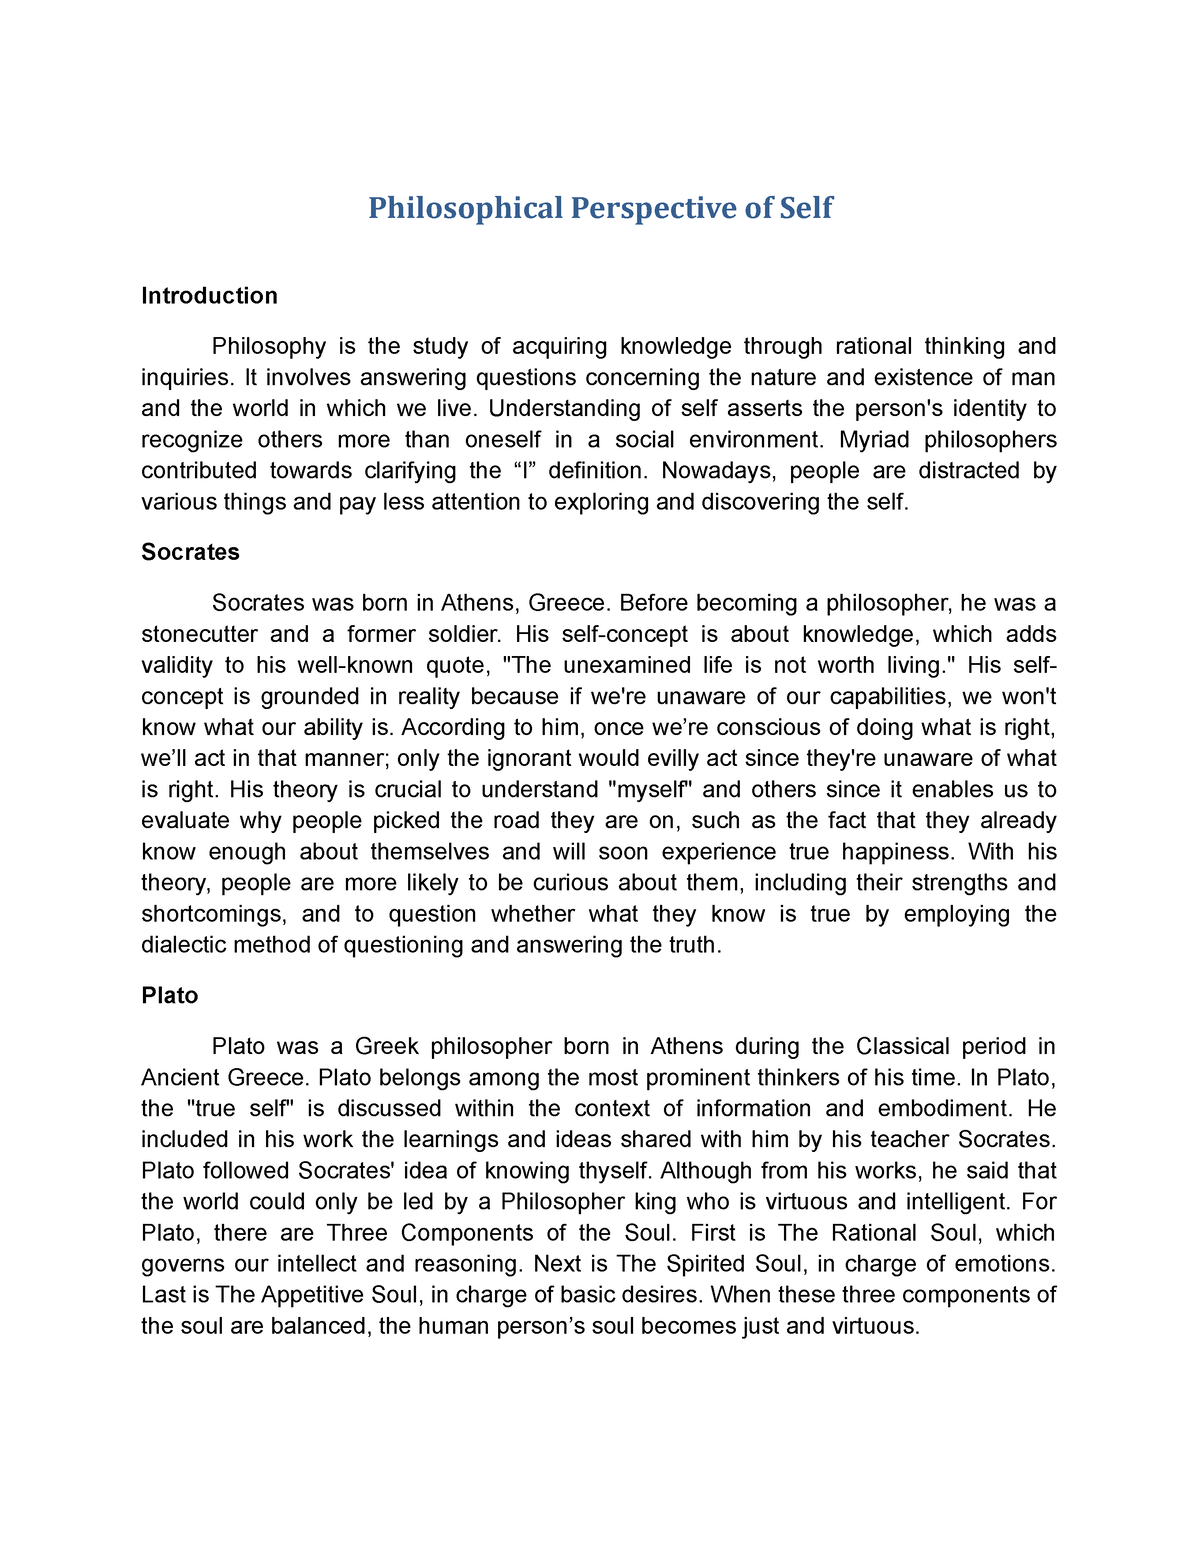 write an essay on the philosophical perspective of the self